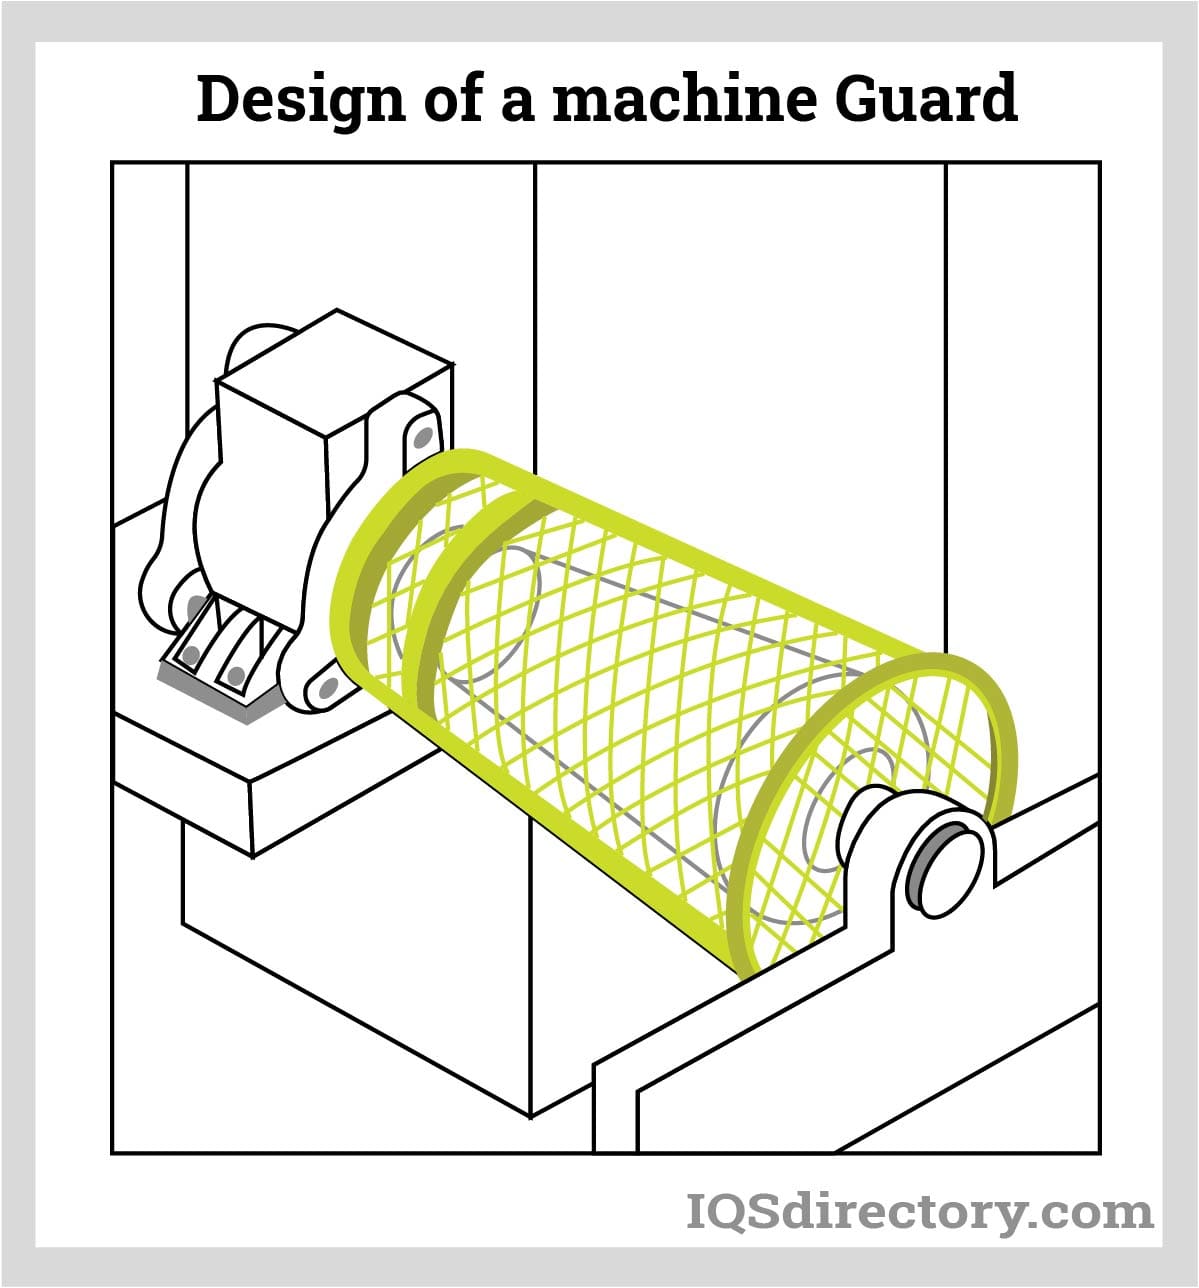 Machine Guards: Types: Applications, Benefits, and Design